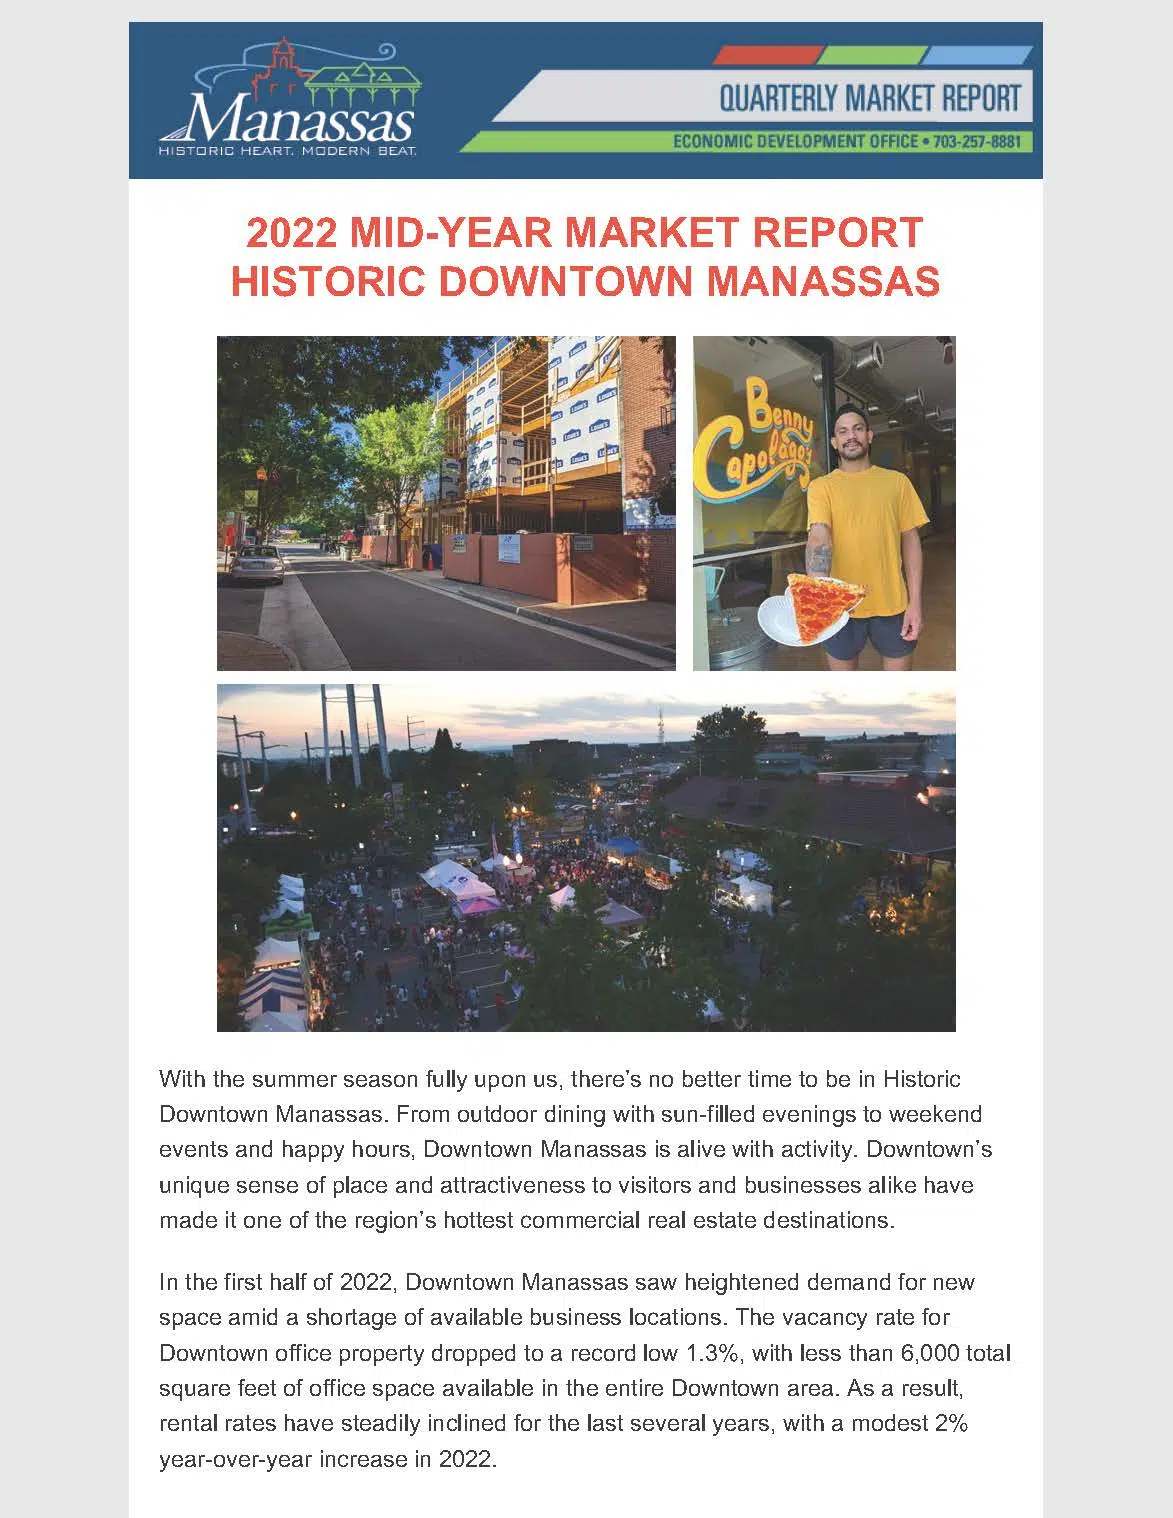 Downtown-Manassas-2022-Mid-Year-Report-7-21-22_Page_1 Reports & Resources